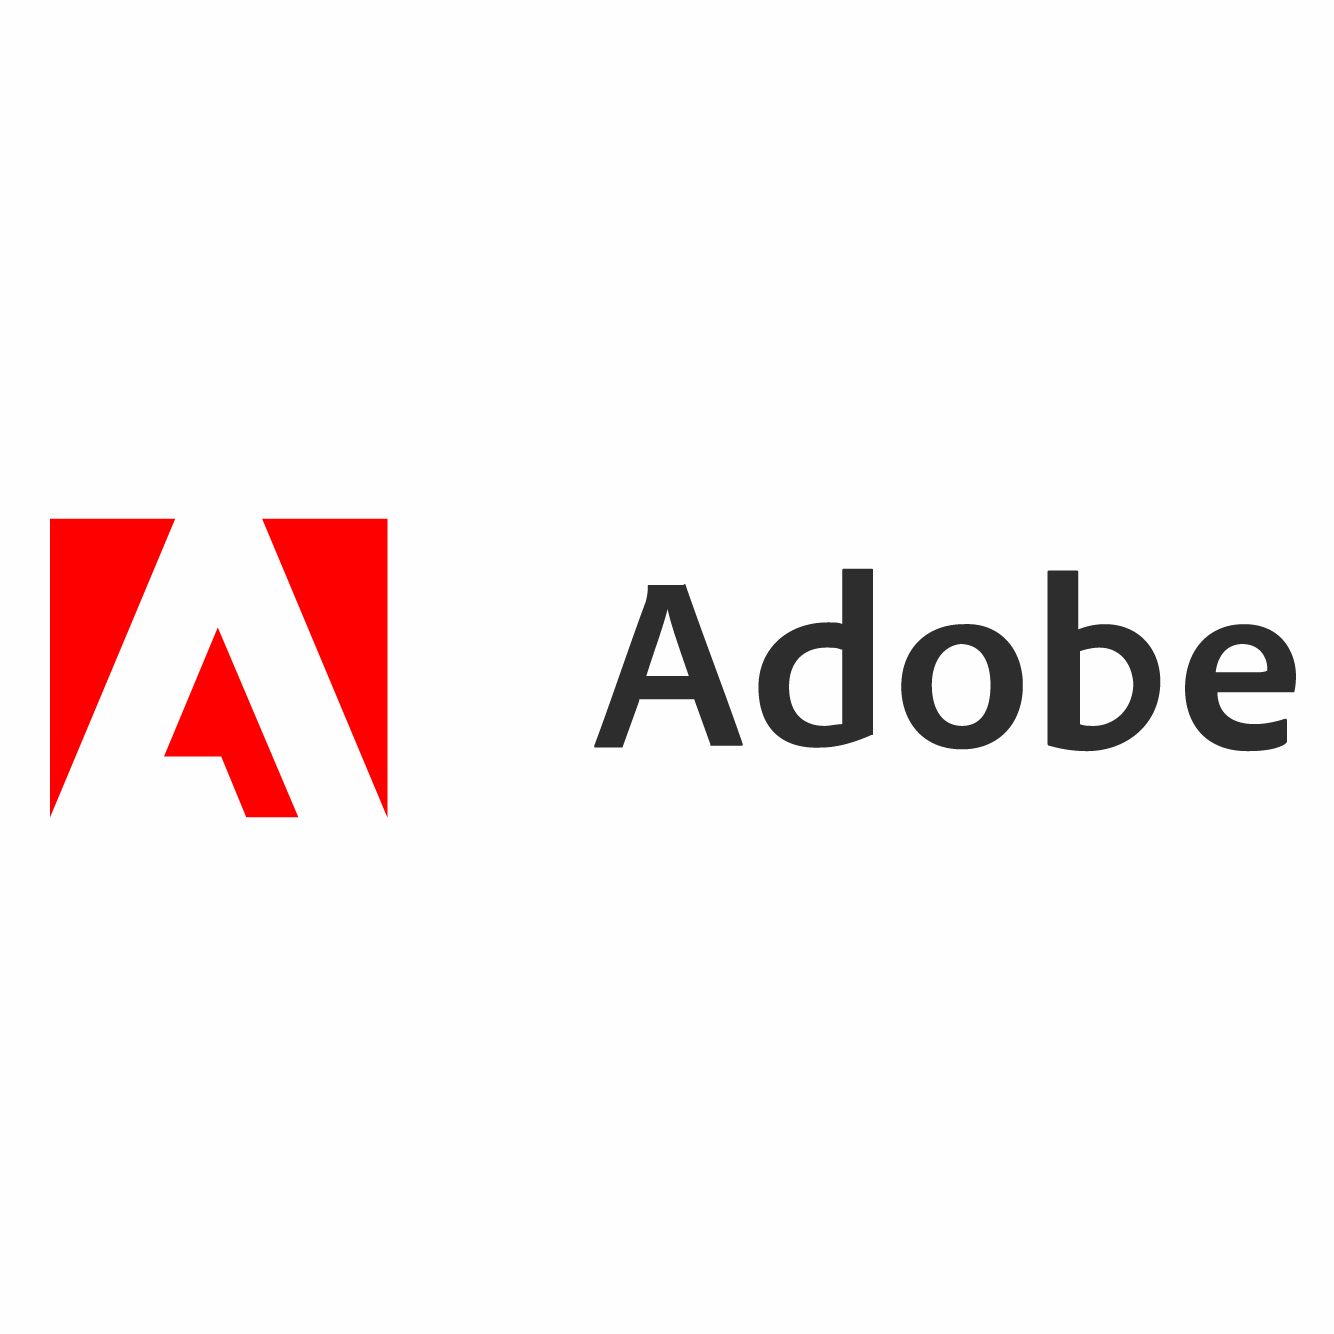 http://securetech.ae/wp-content/uploads/2019/02/17.ADOBE_.png